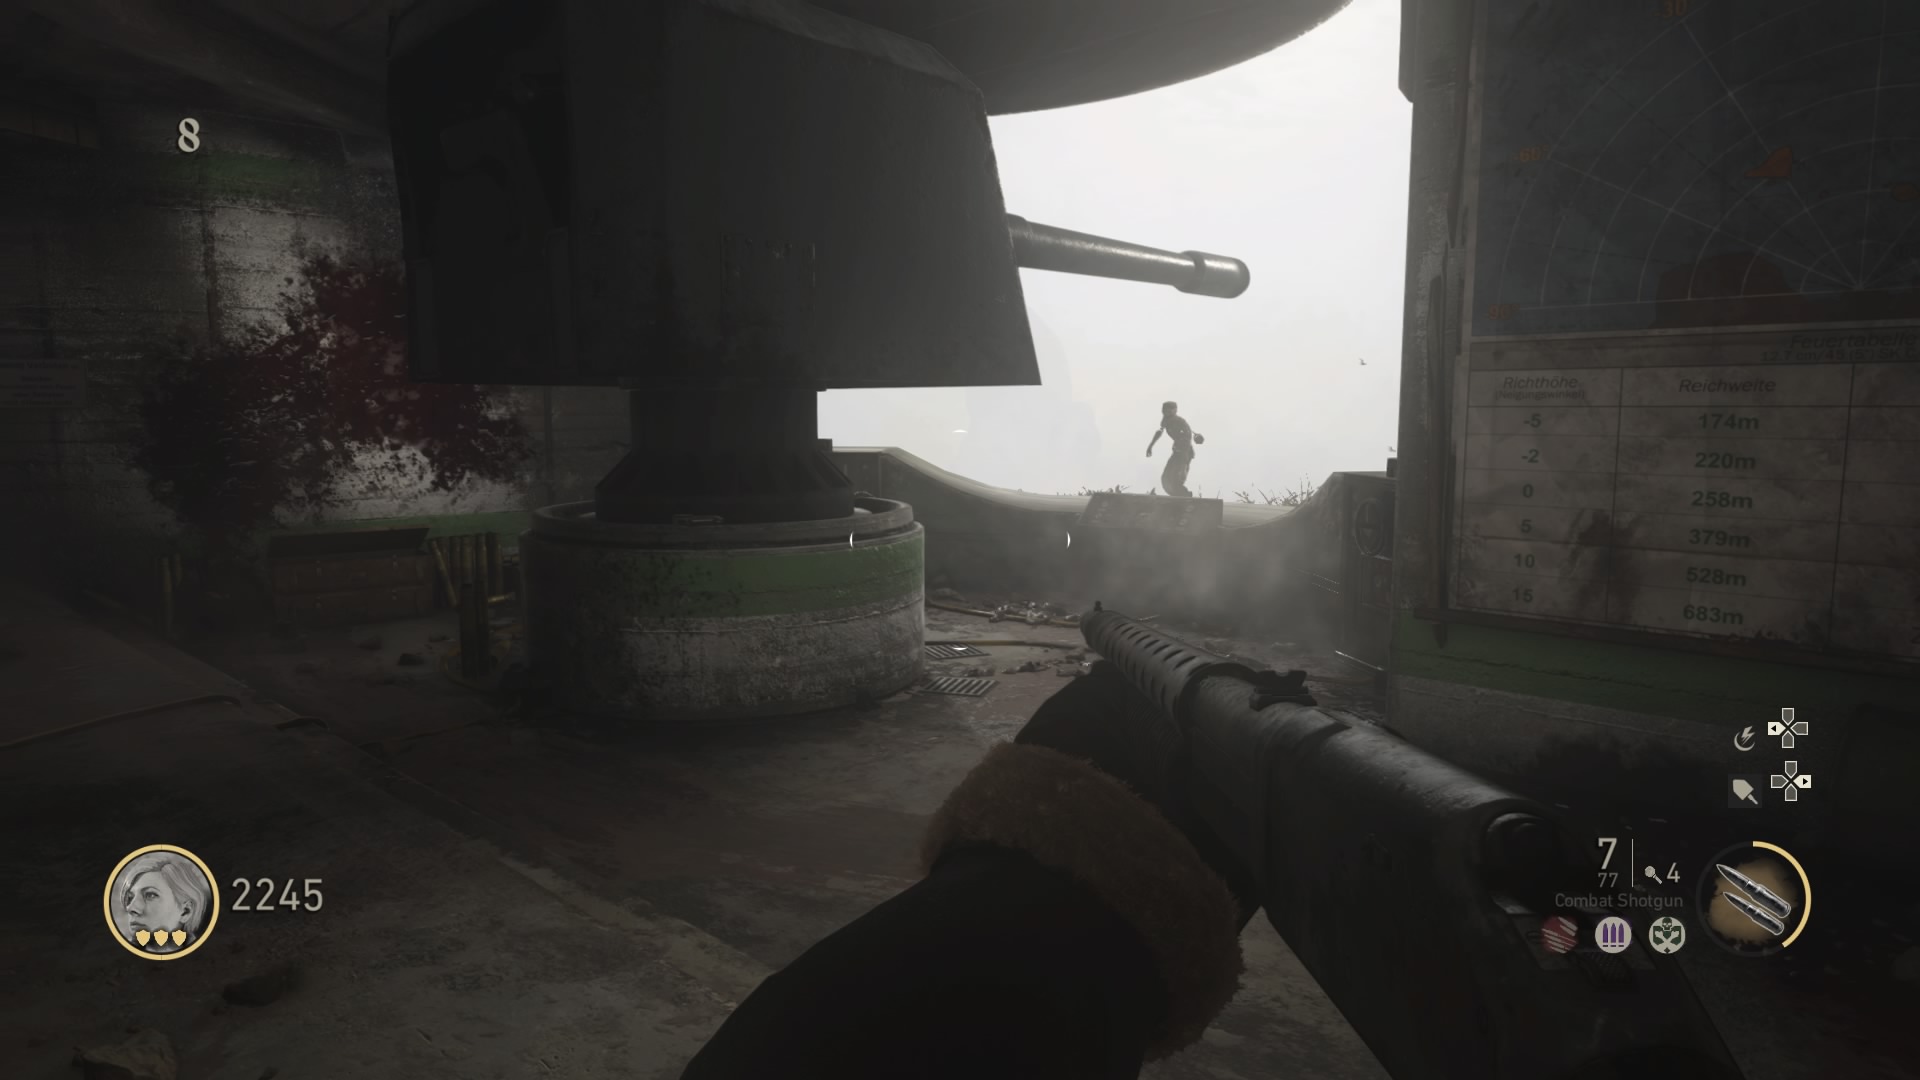 Call of duty: WW2 gameplay #6 Check more at